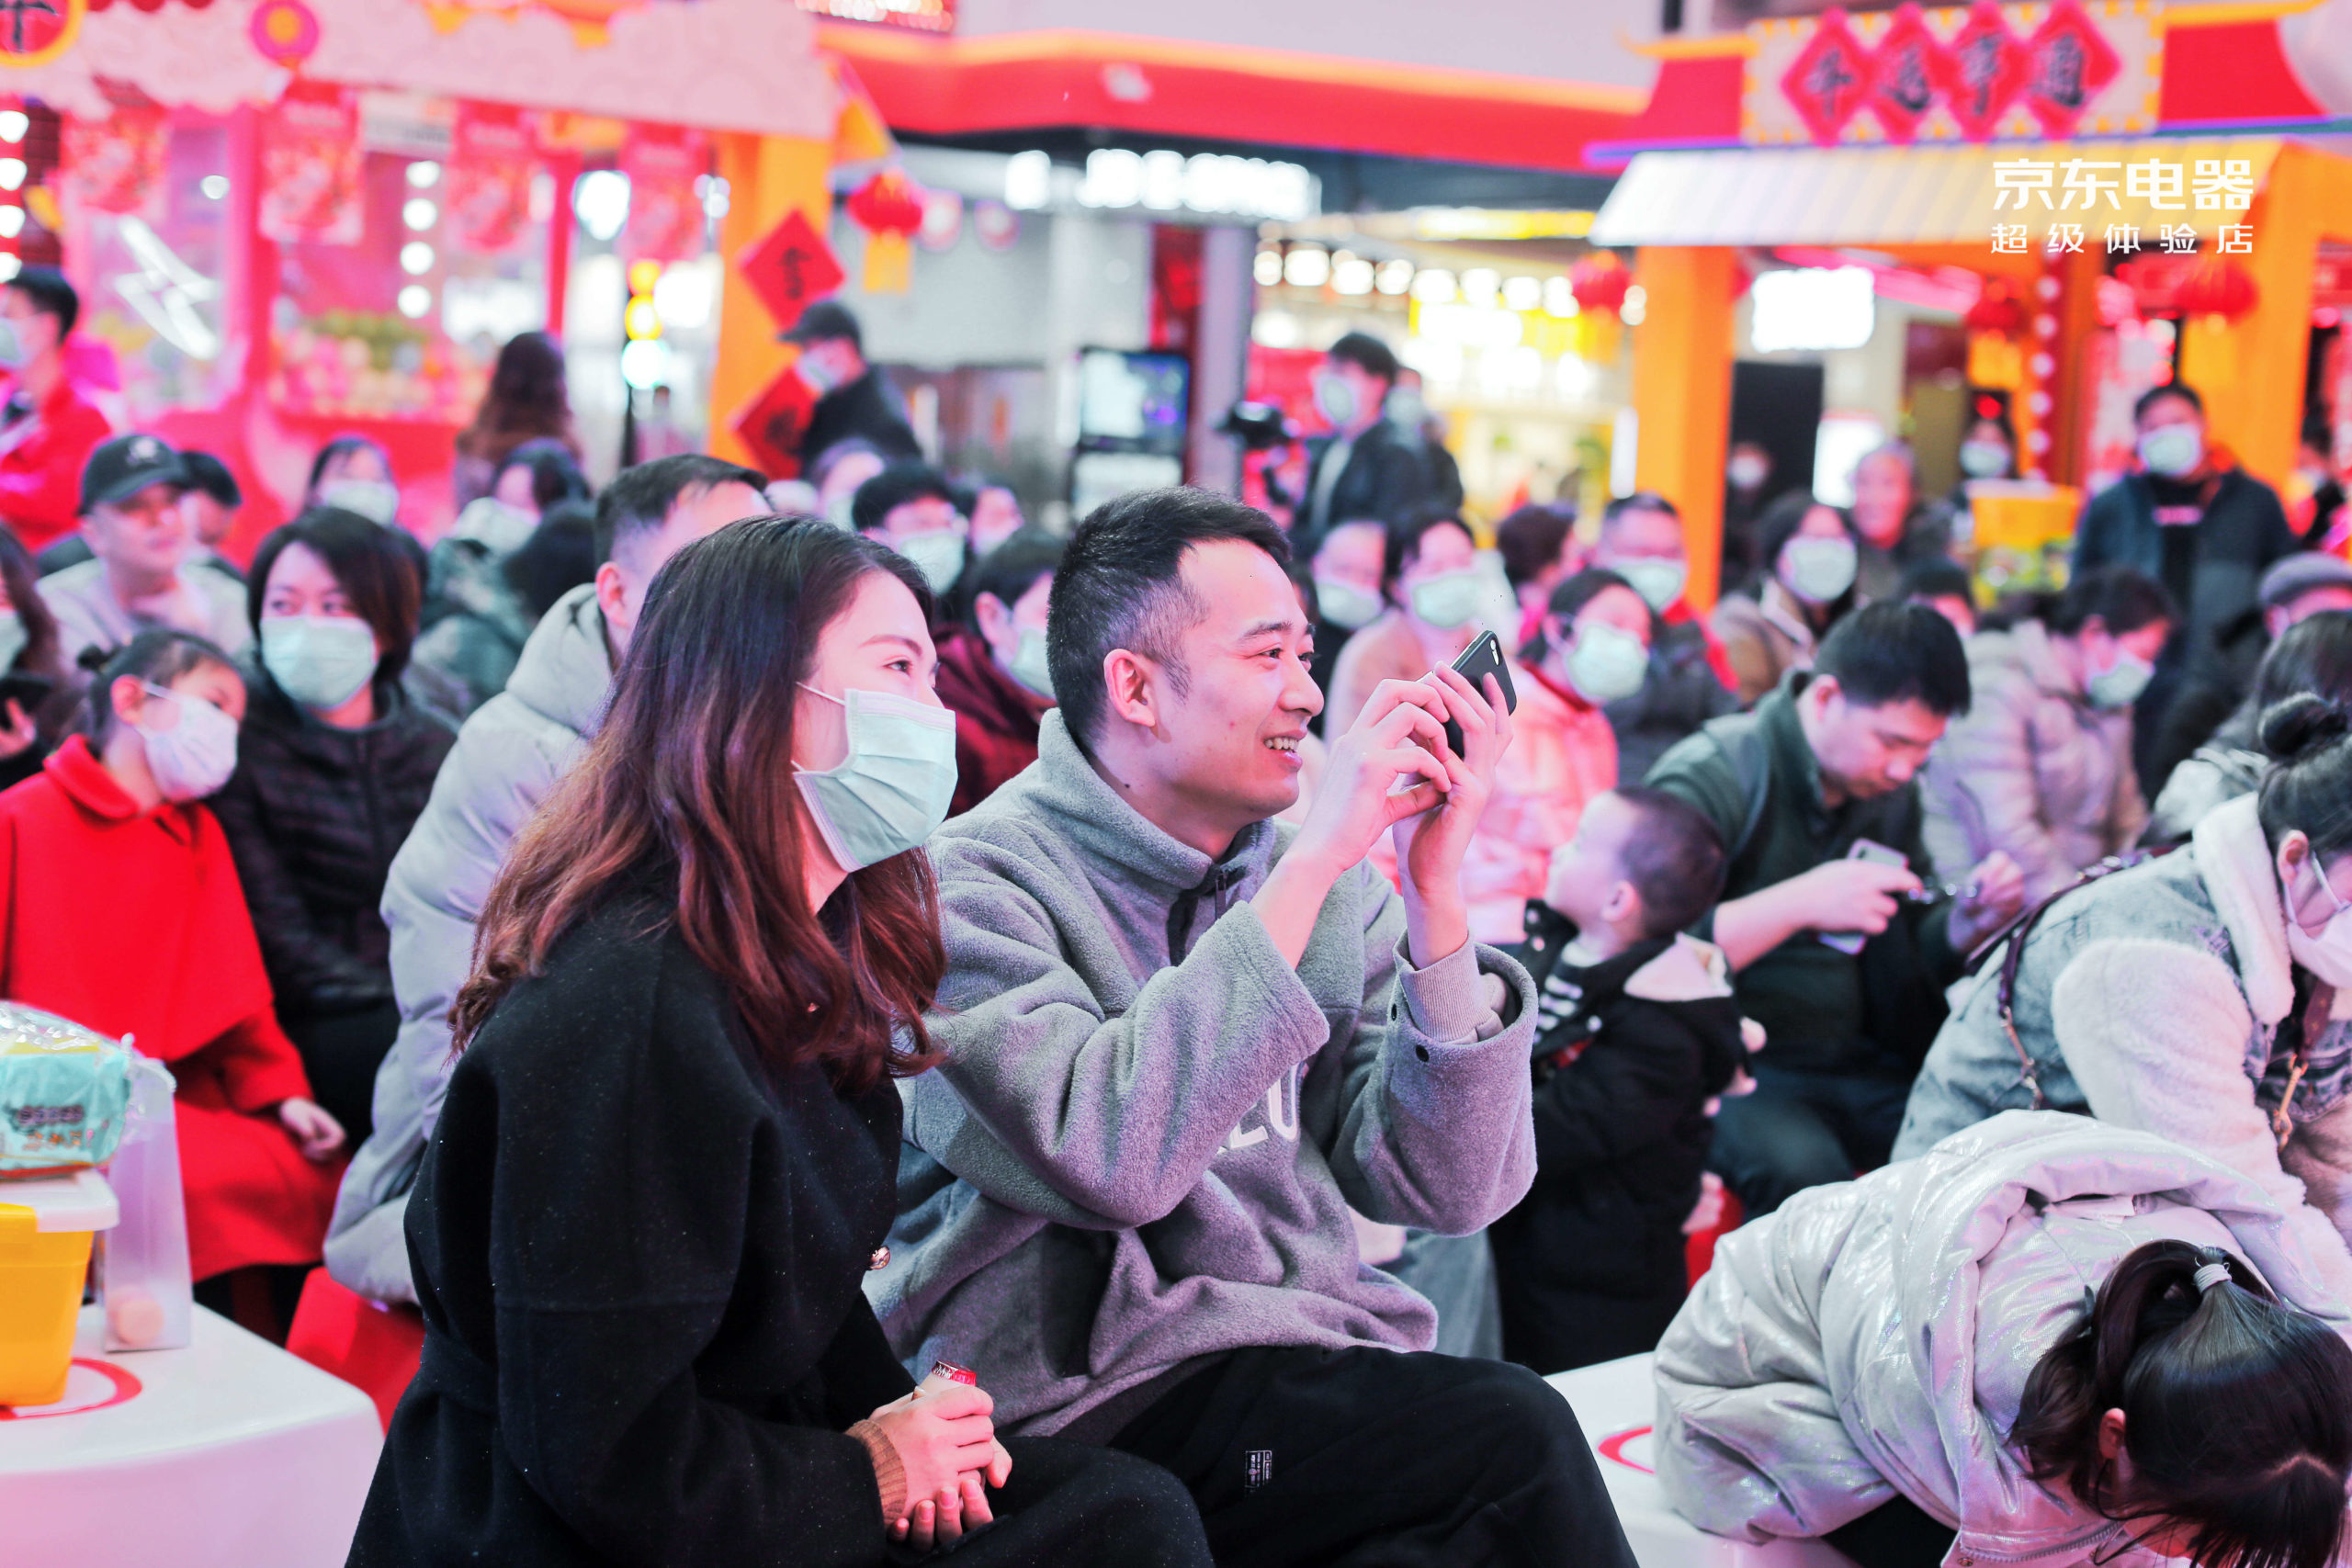 JD Home Appliance flagship stores have launched a New Year’s celebration event